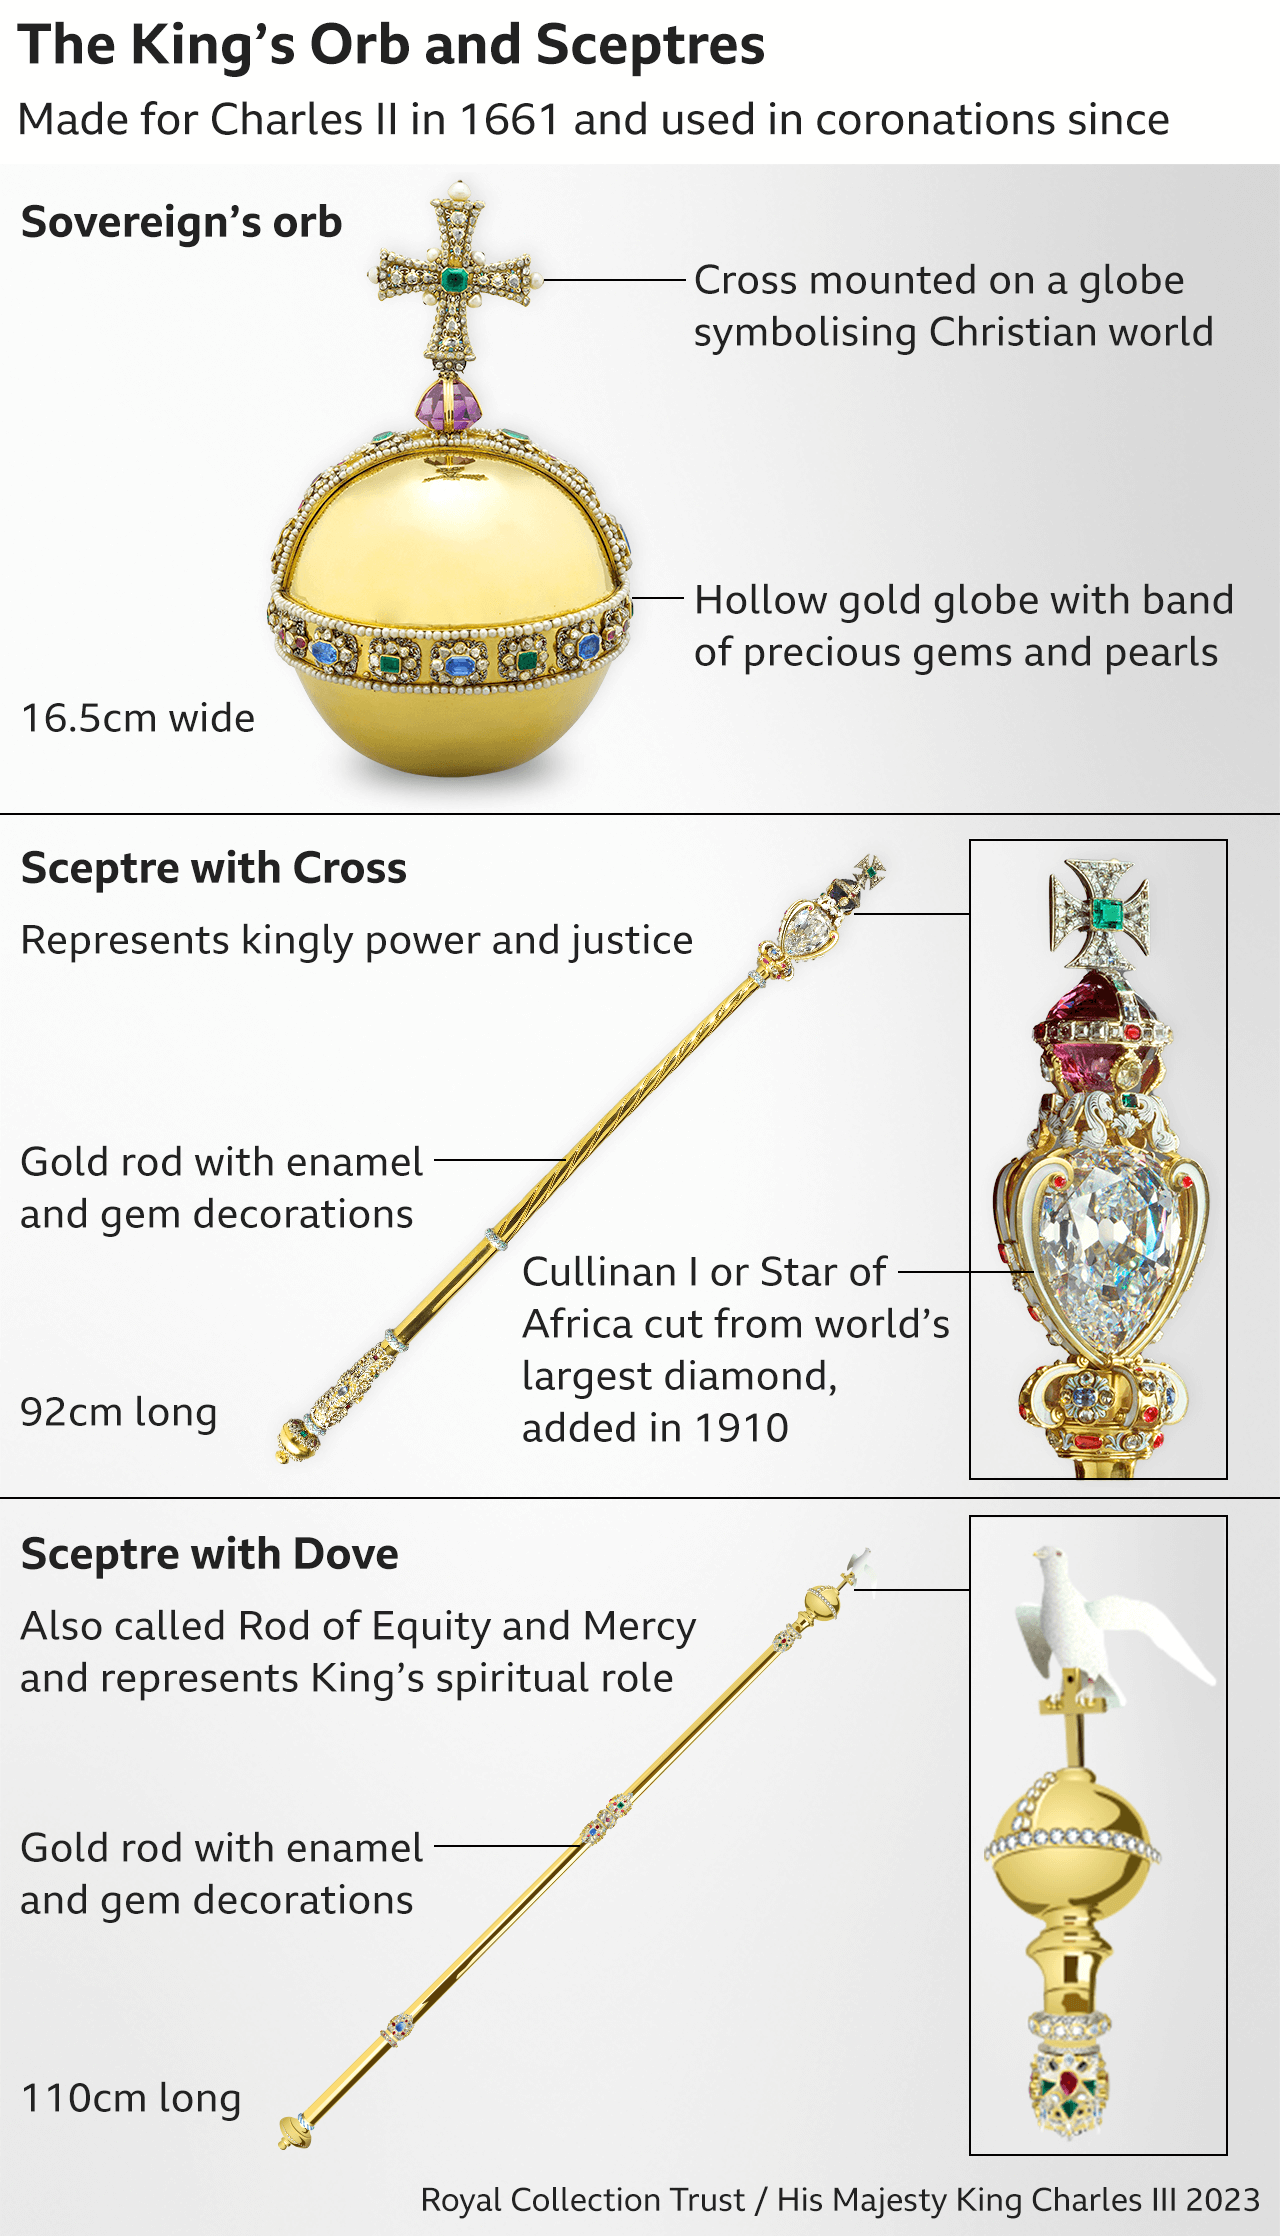 Graphic showing the Sovereign's Orb, symbolising the Christian world, the Sceptre with Cross representing kingly power and justice, and the Sceptre with Dove representing the King's spiritual role